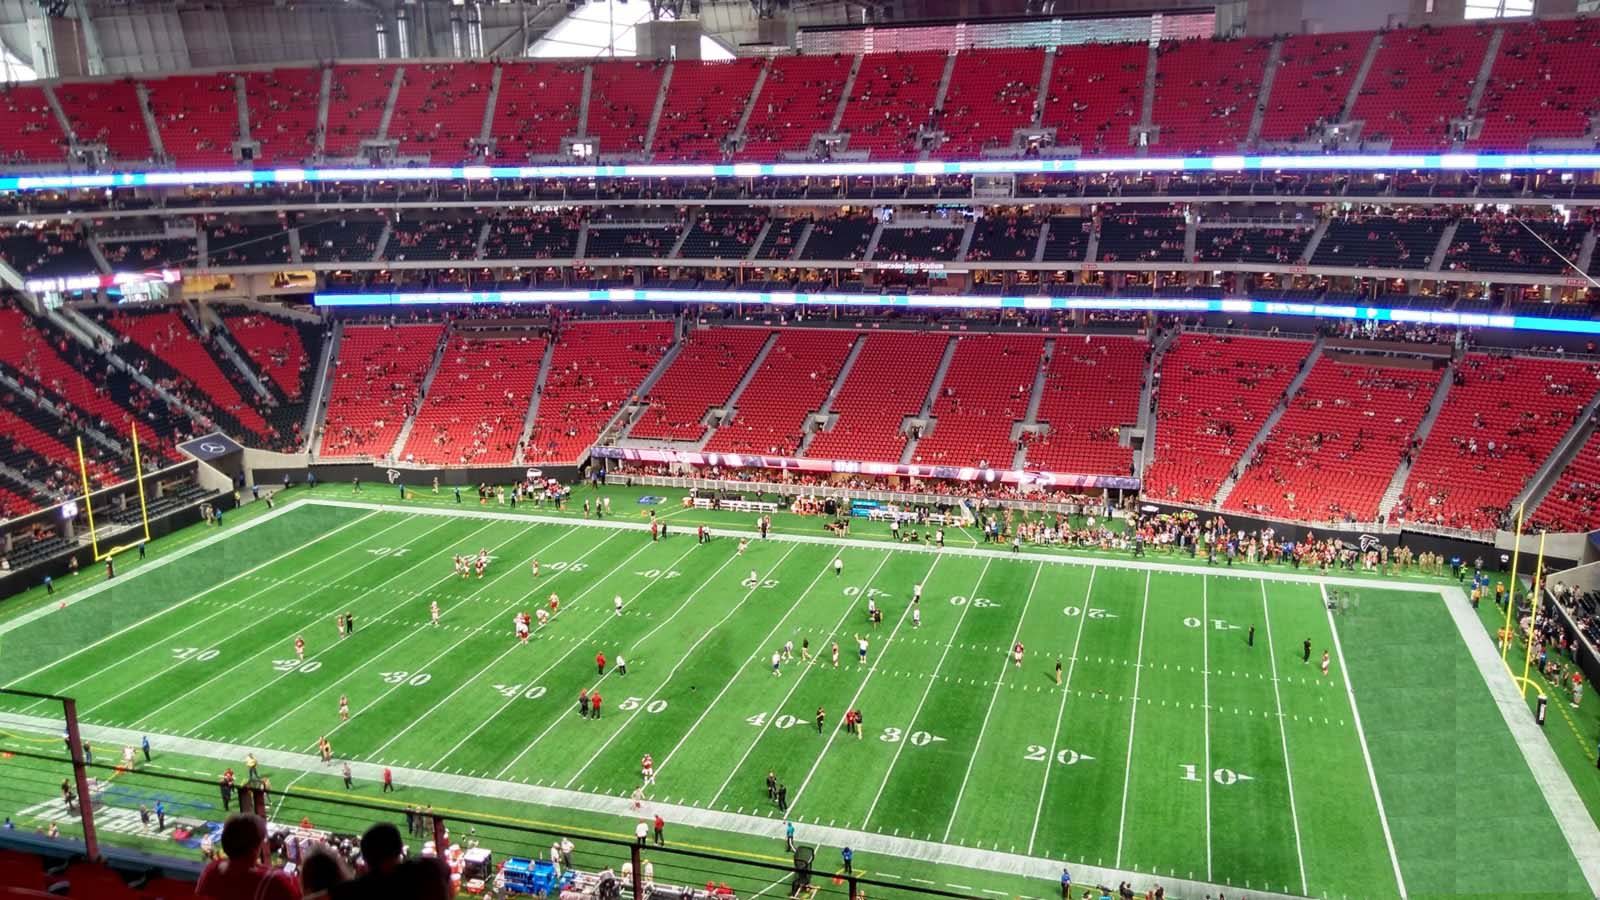 section 337, row 7 seat view  for football - mercedes-benz stadium